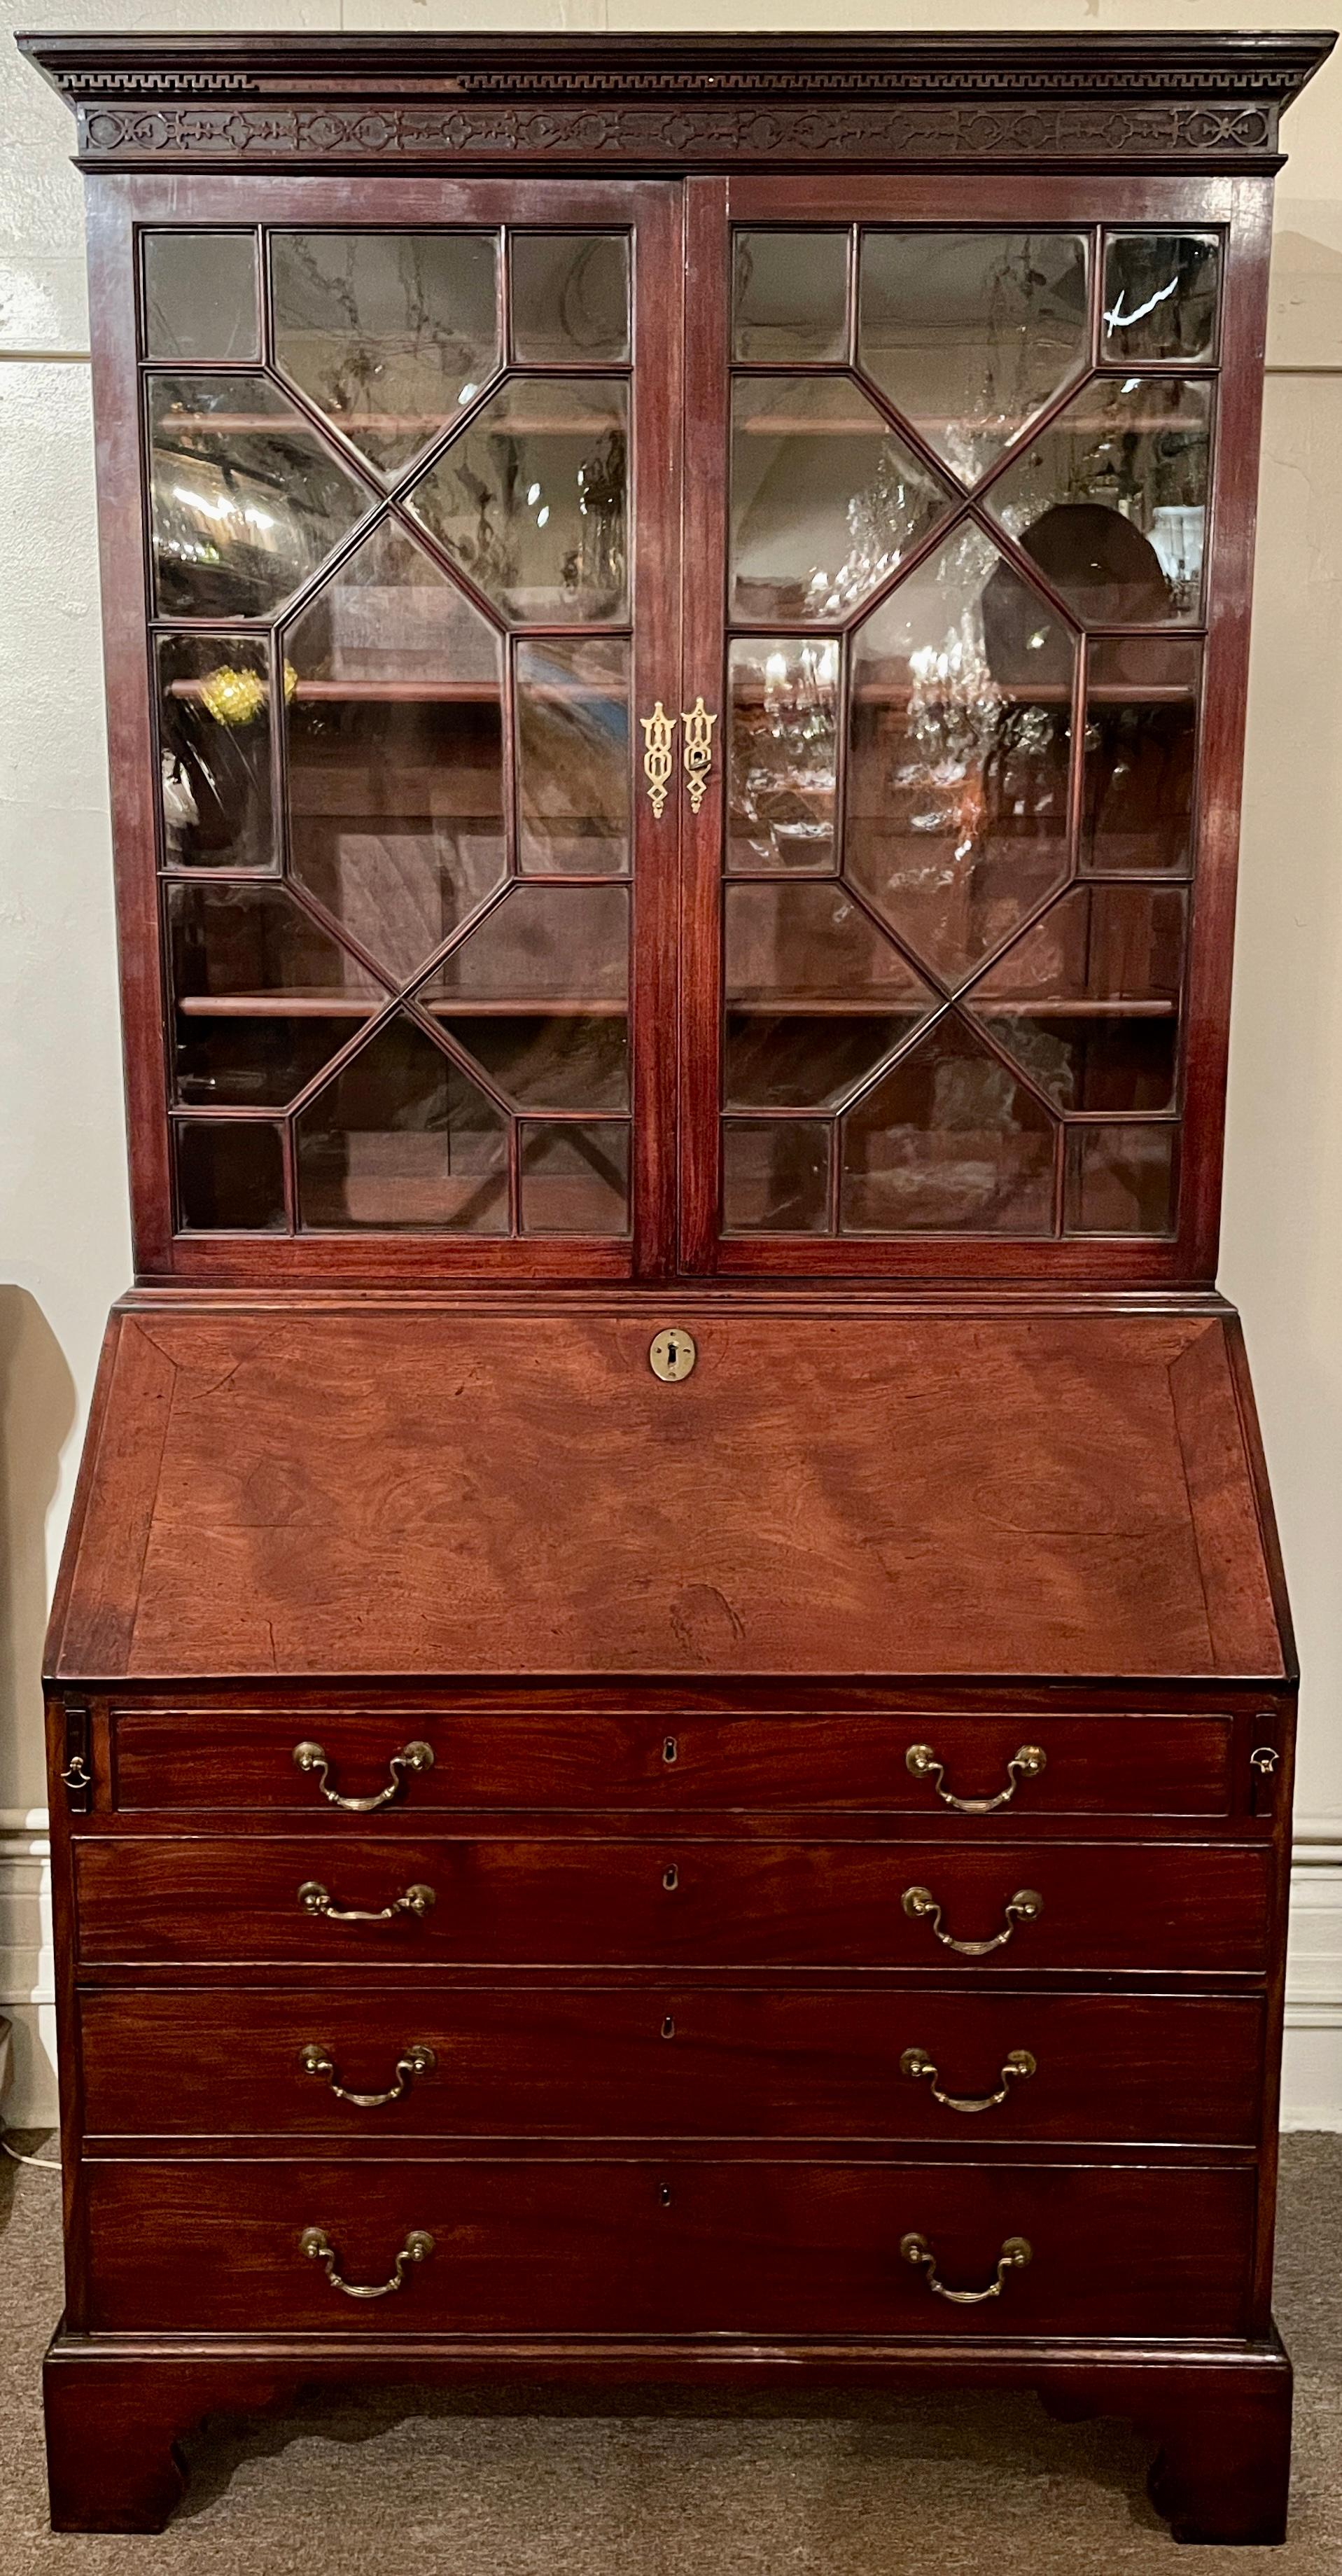 Antique English mahogany glass front Bureau bookcase with Fitted Interior, circa 1830.